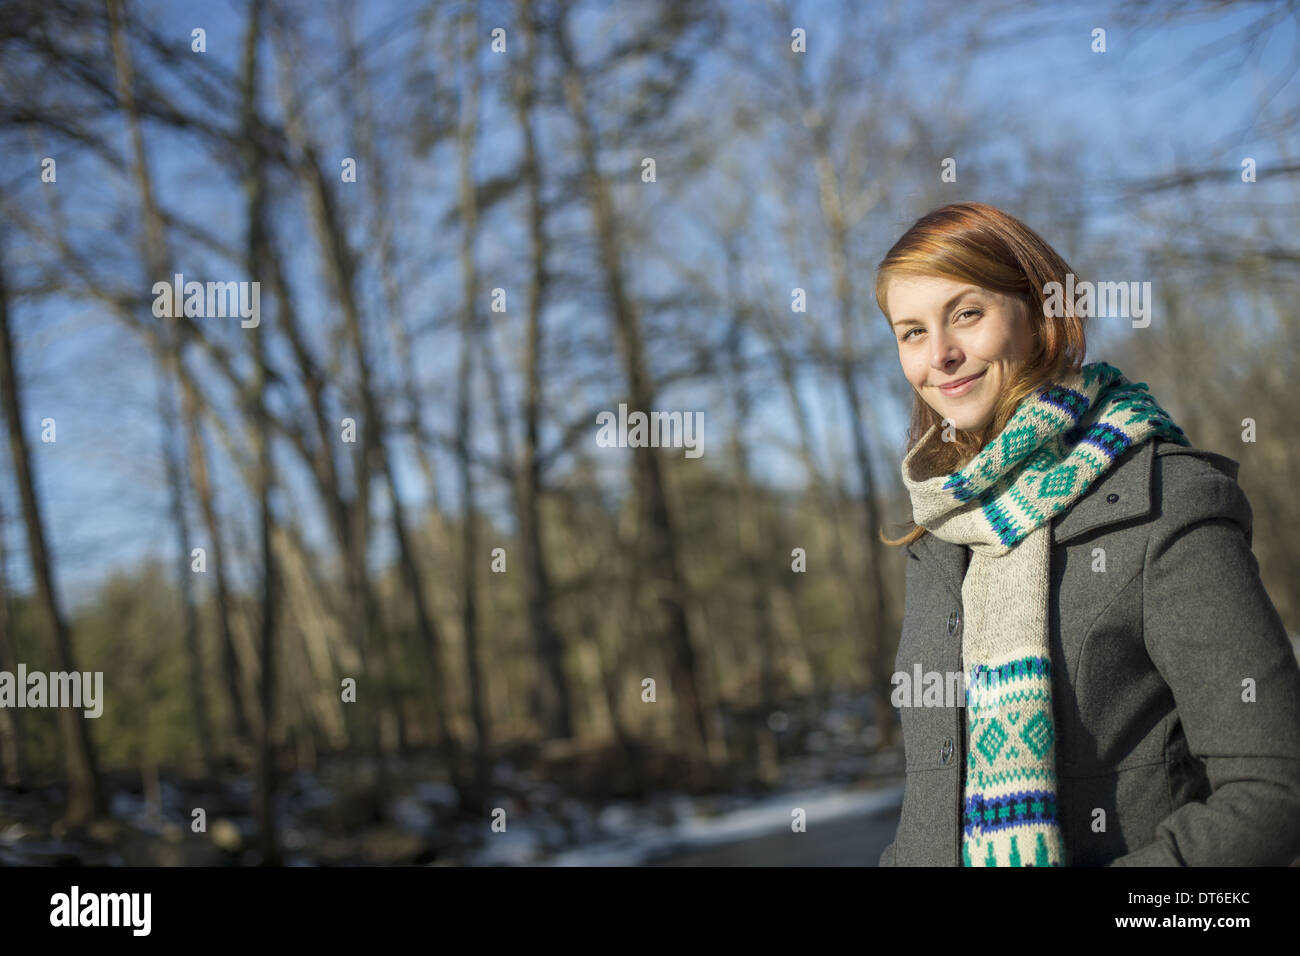 A young woman in a woodland on a winter day.  Wearing a bright knitted patterned scarf. Stock Photo